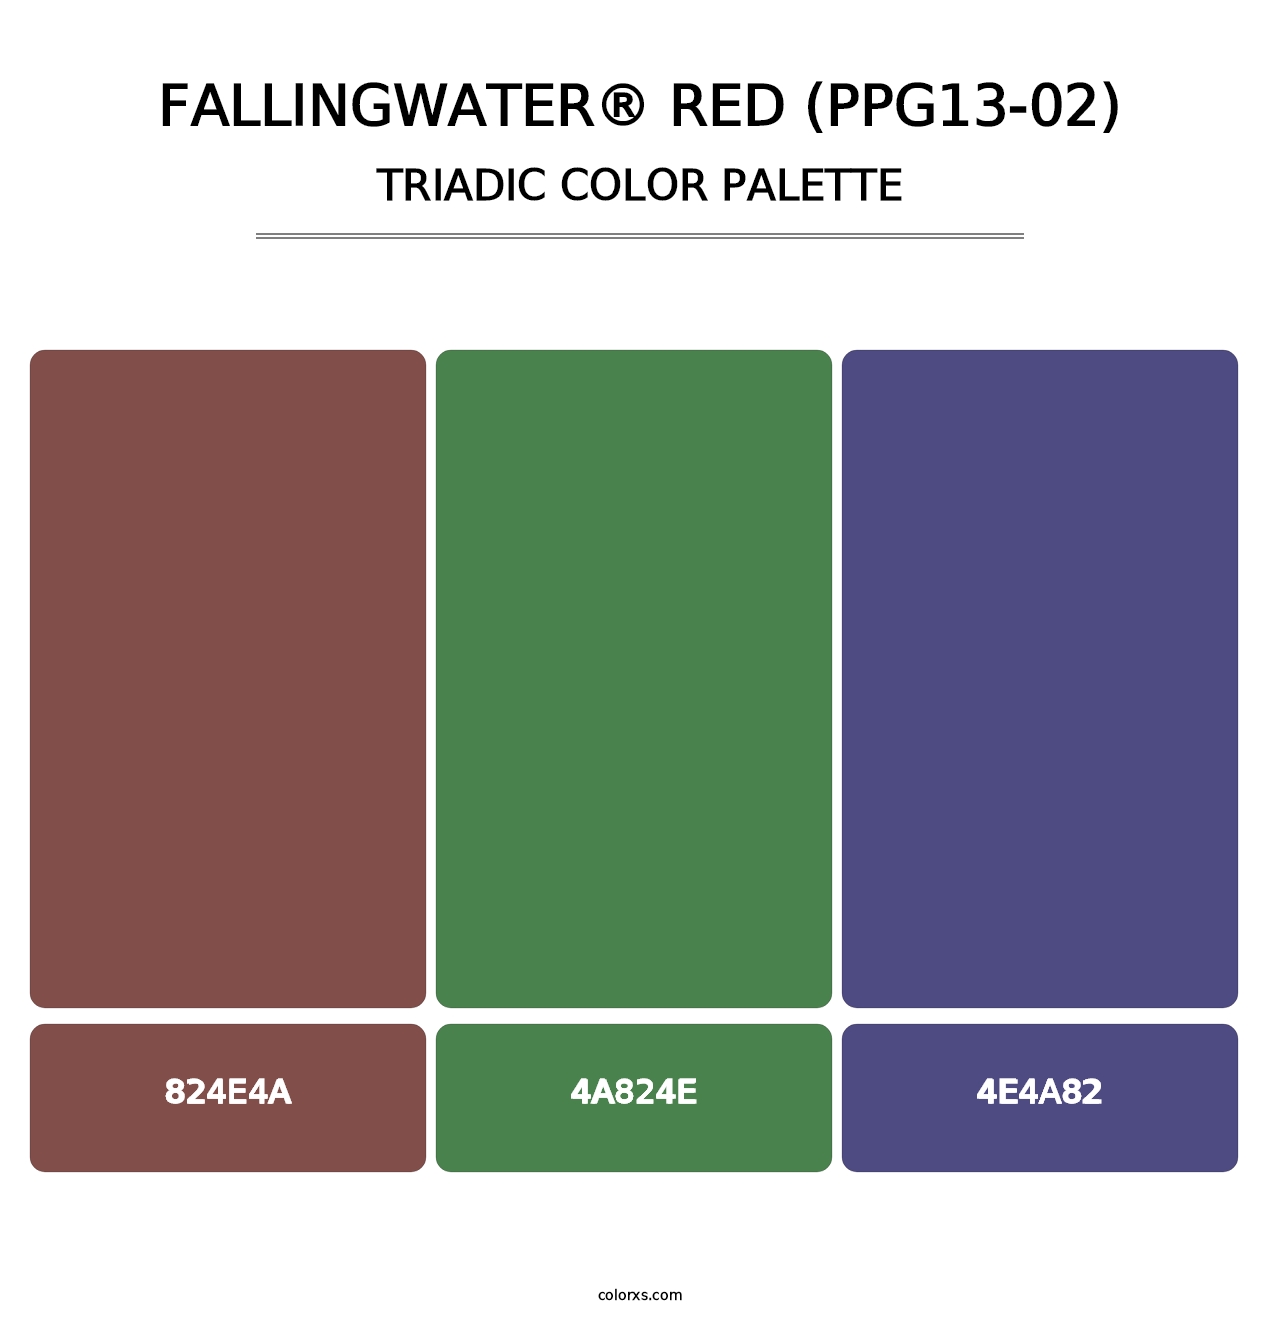 Fallingwater® Red (PPG13-02) - Triadic Color Palette